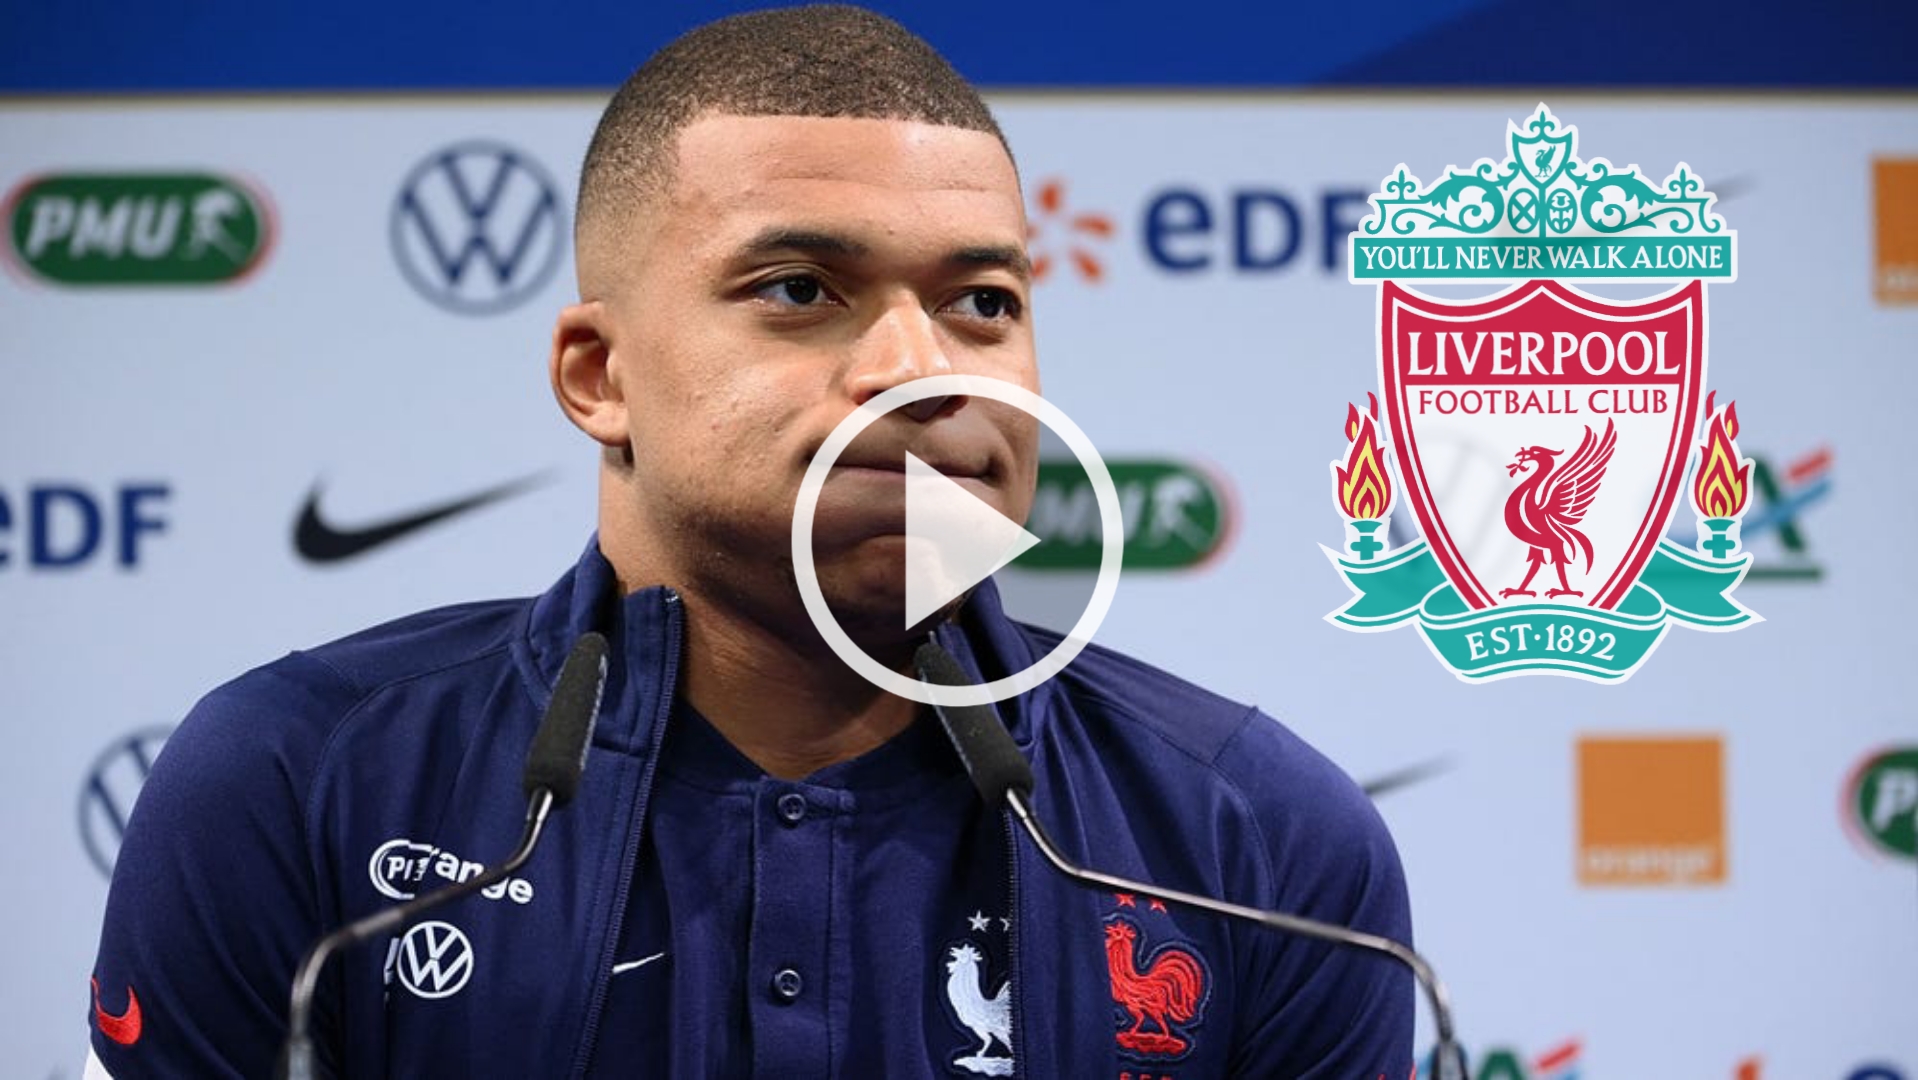 'i love Liverpool but' - Watch Kylian Mbappe makes final transfer decision amid strong Liverpool links 1 Sportelo